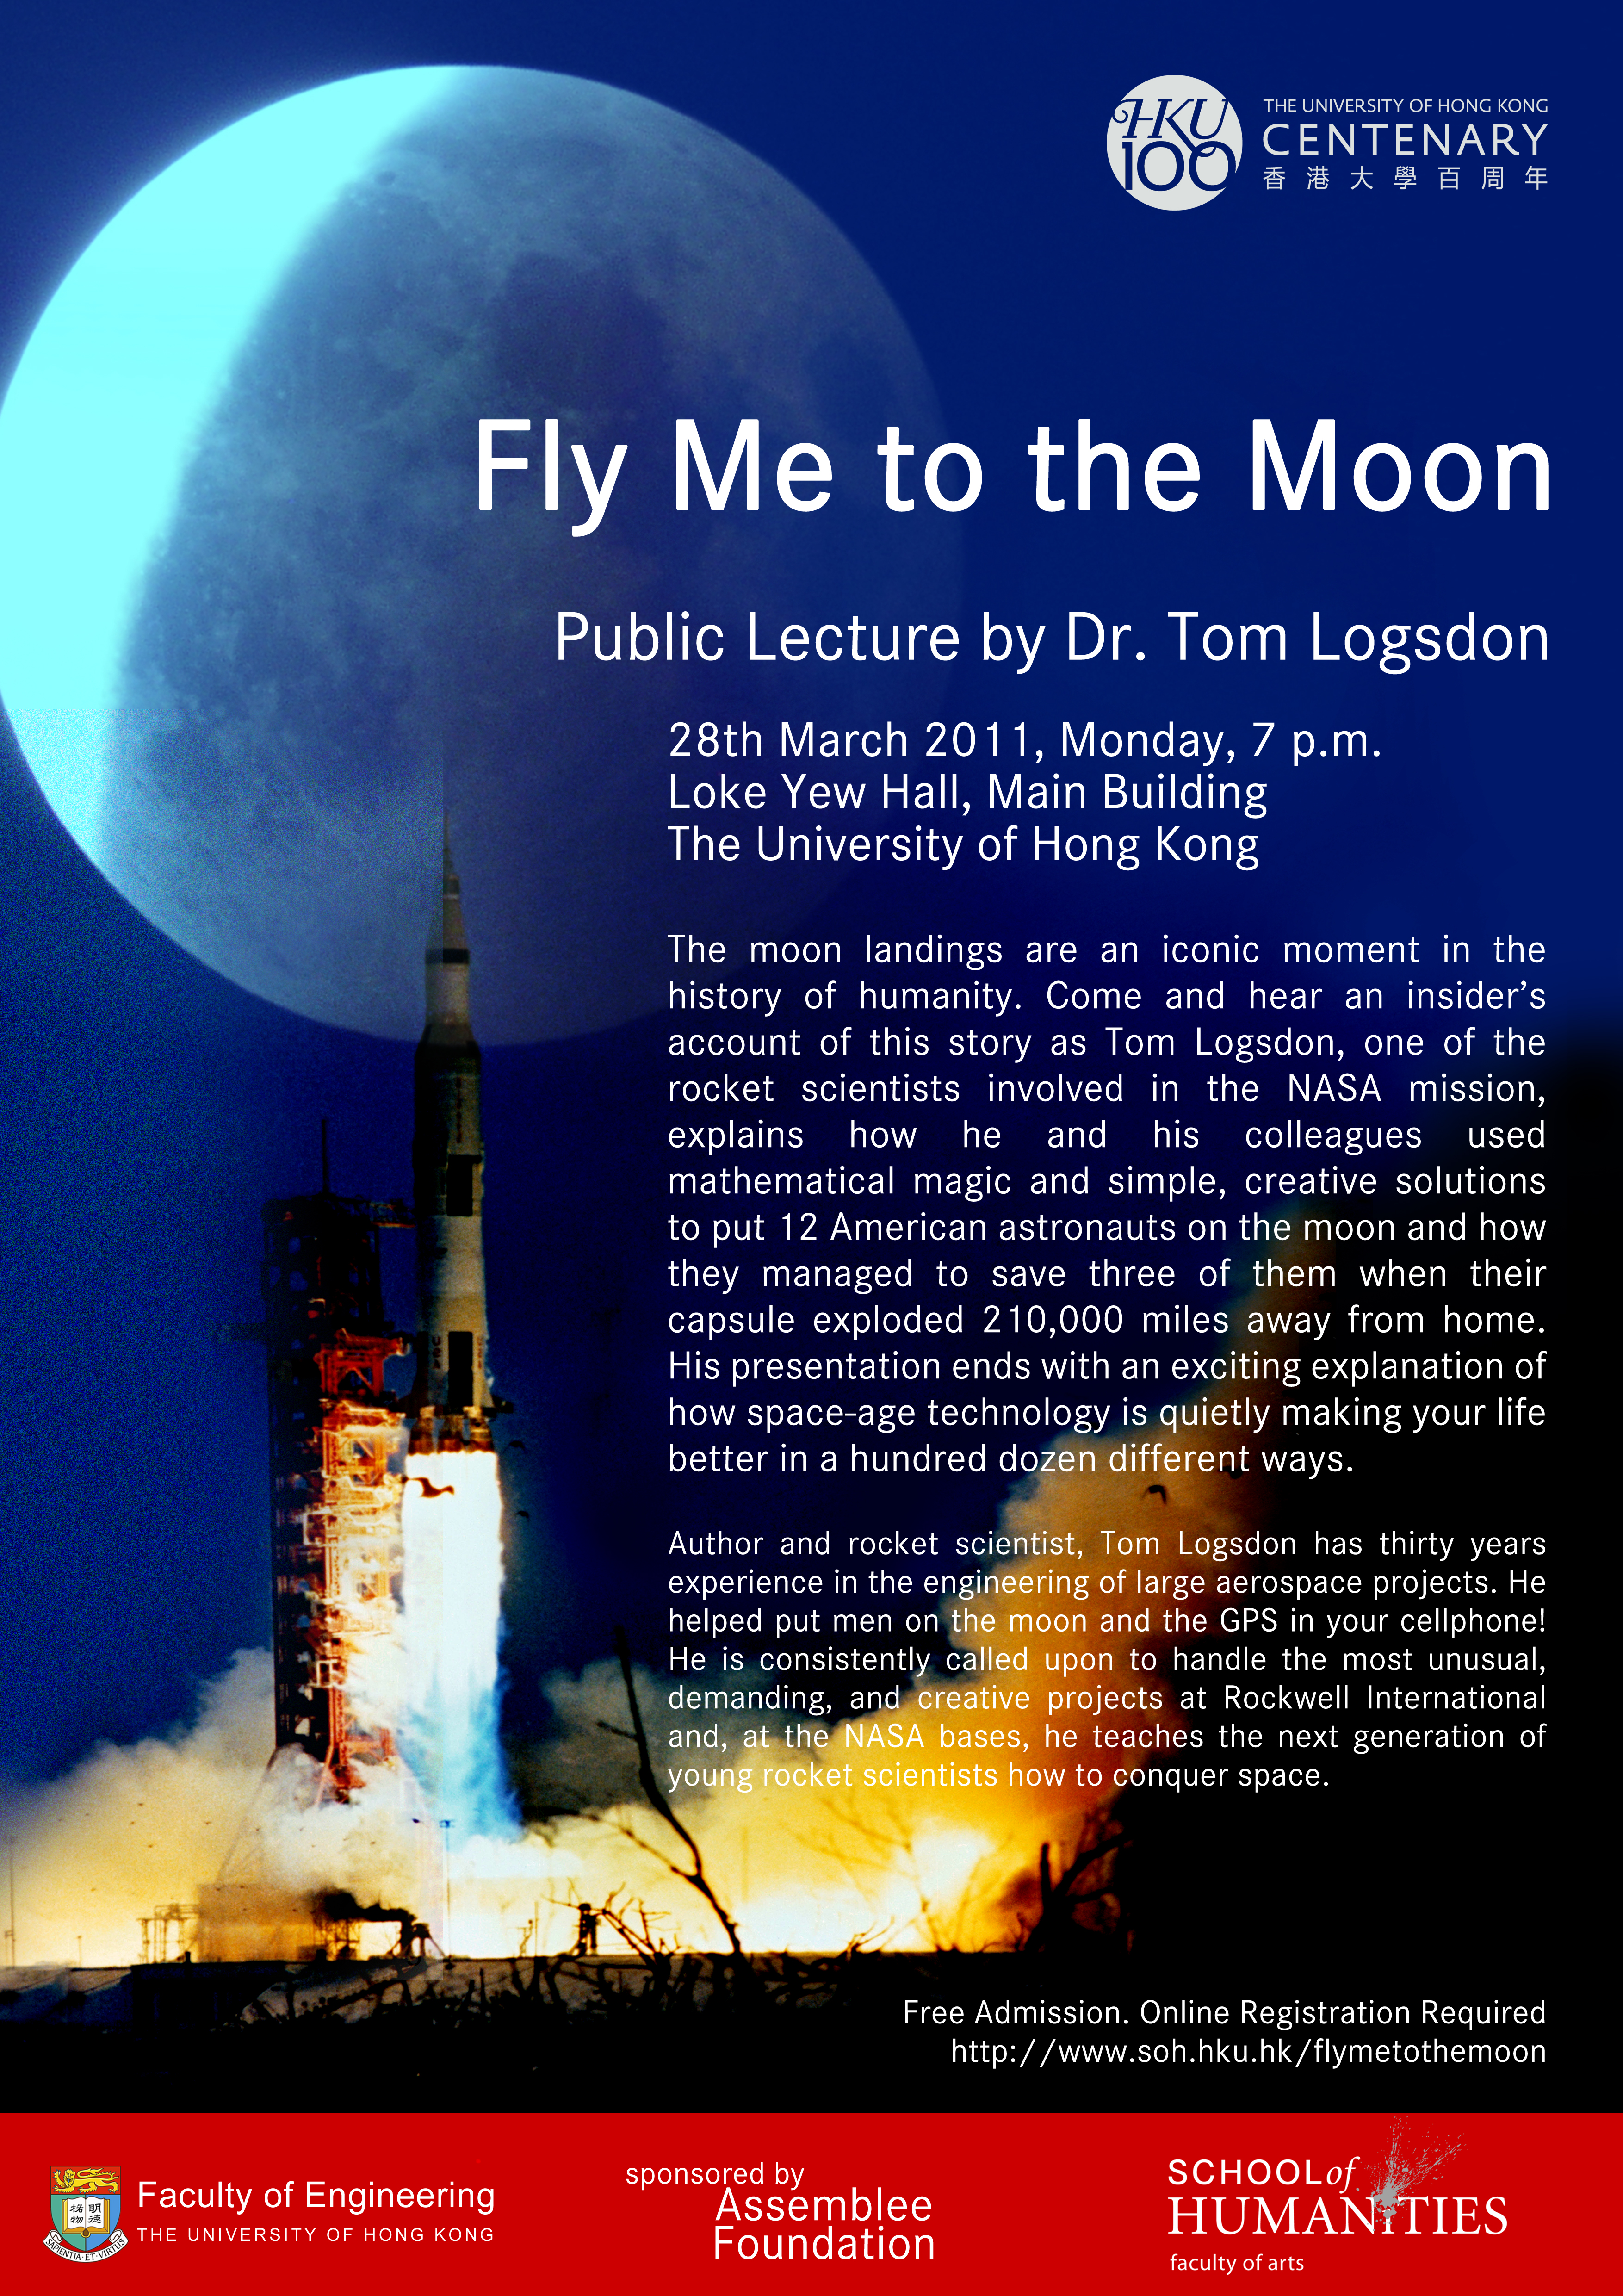 Public Lecture by Tom Logsdon, March 28 2011 (Monday) 7:00pm, Loke Yew Hall, HKU